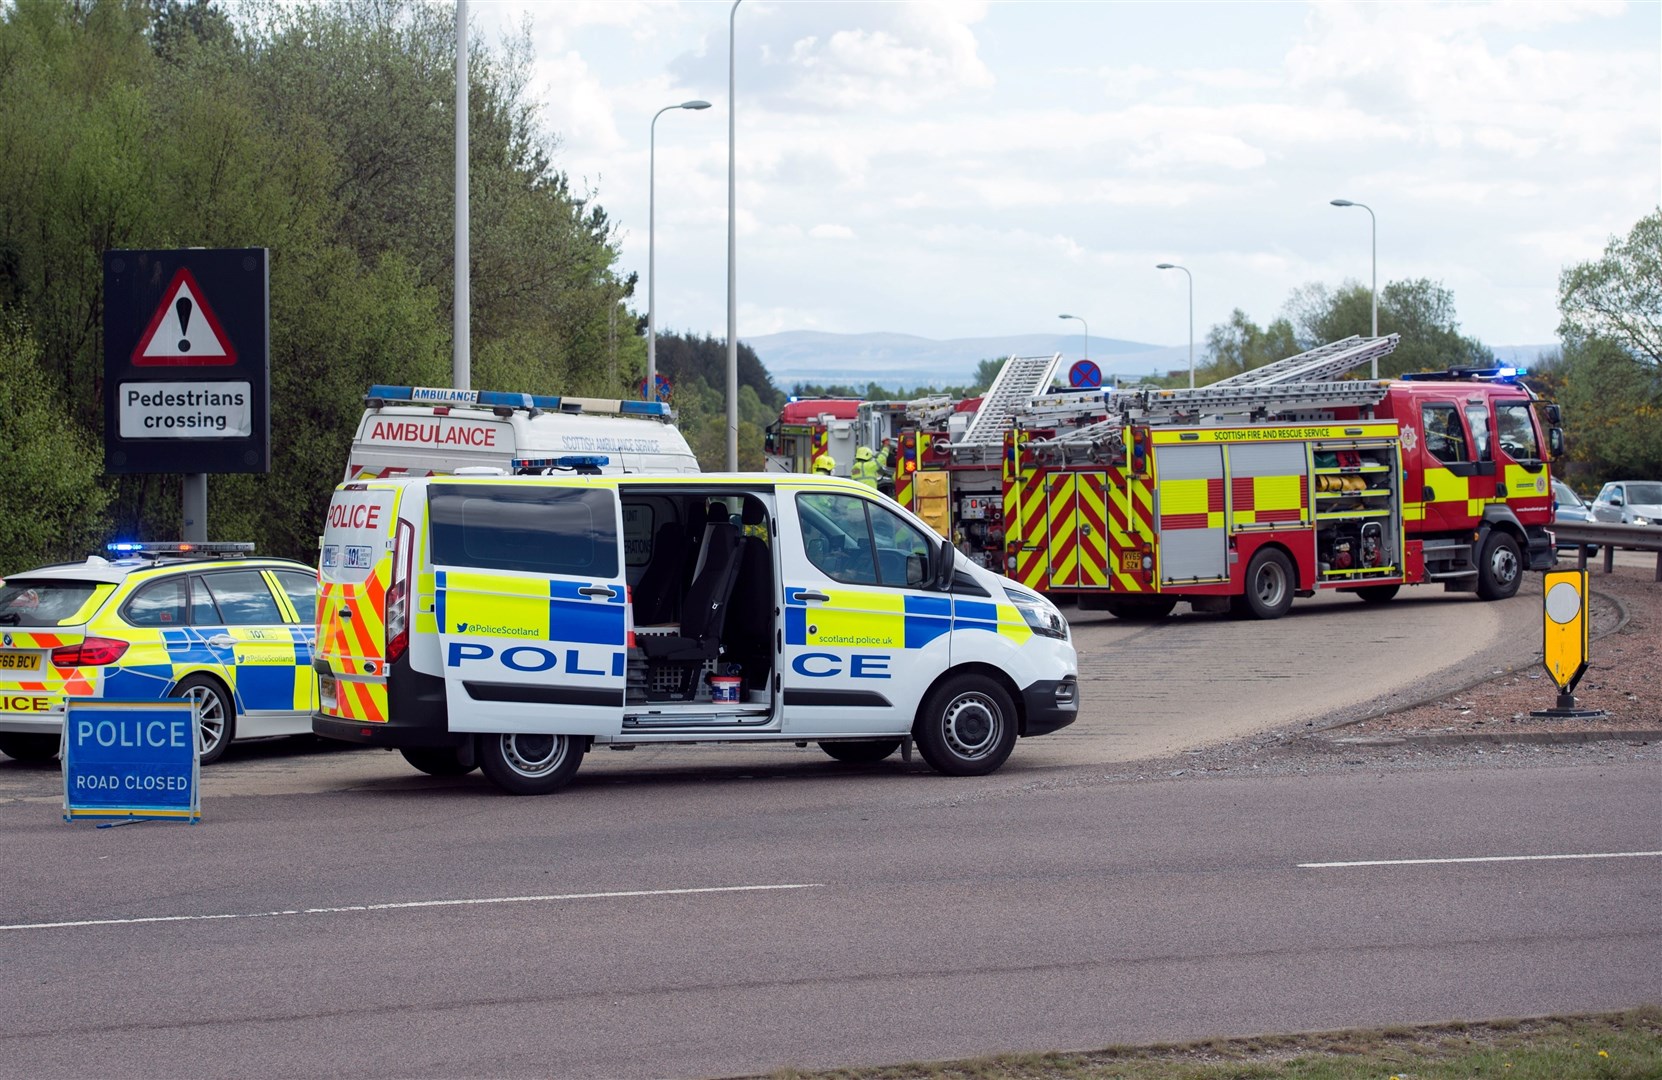 Emergency crews have closed the southbound carriageway at the Tore roundabout.